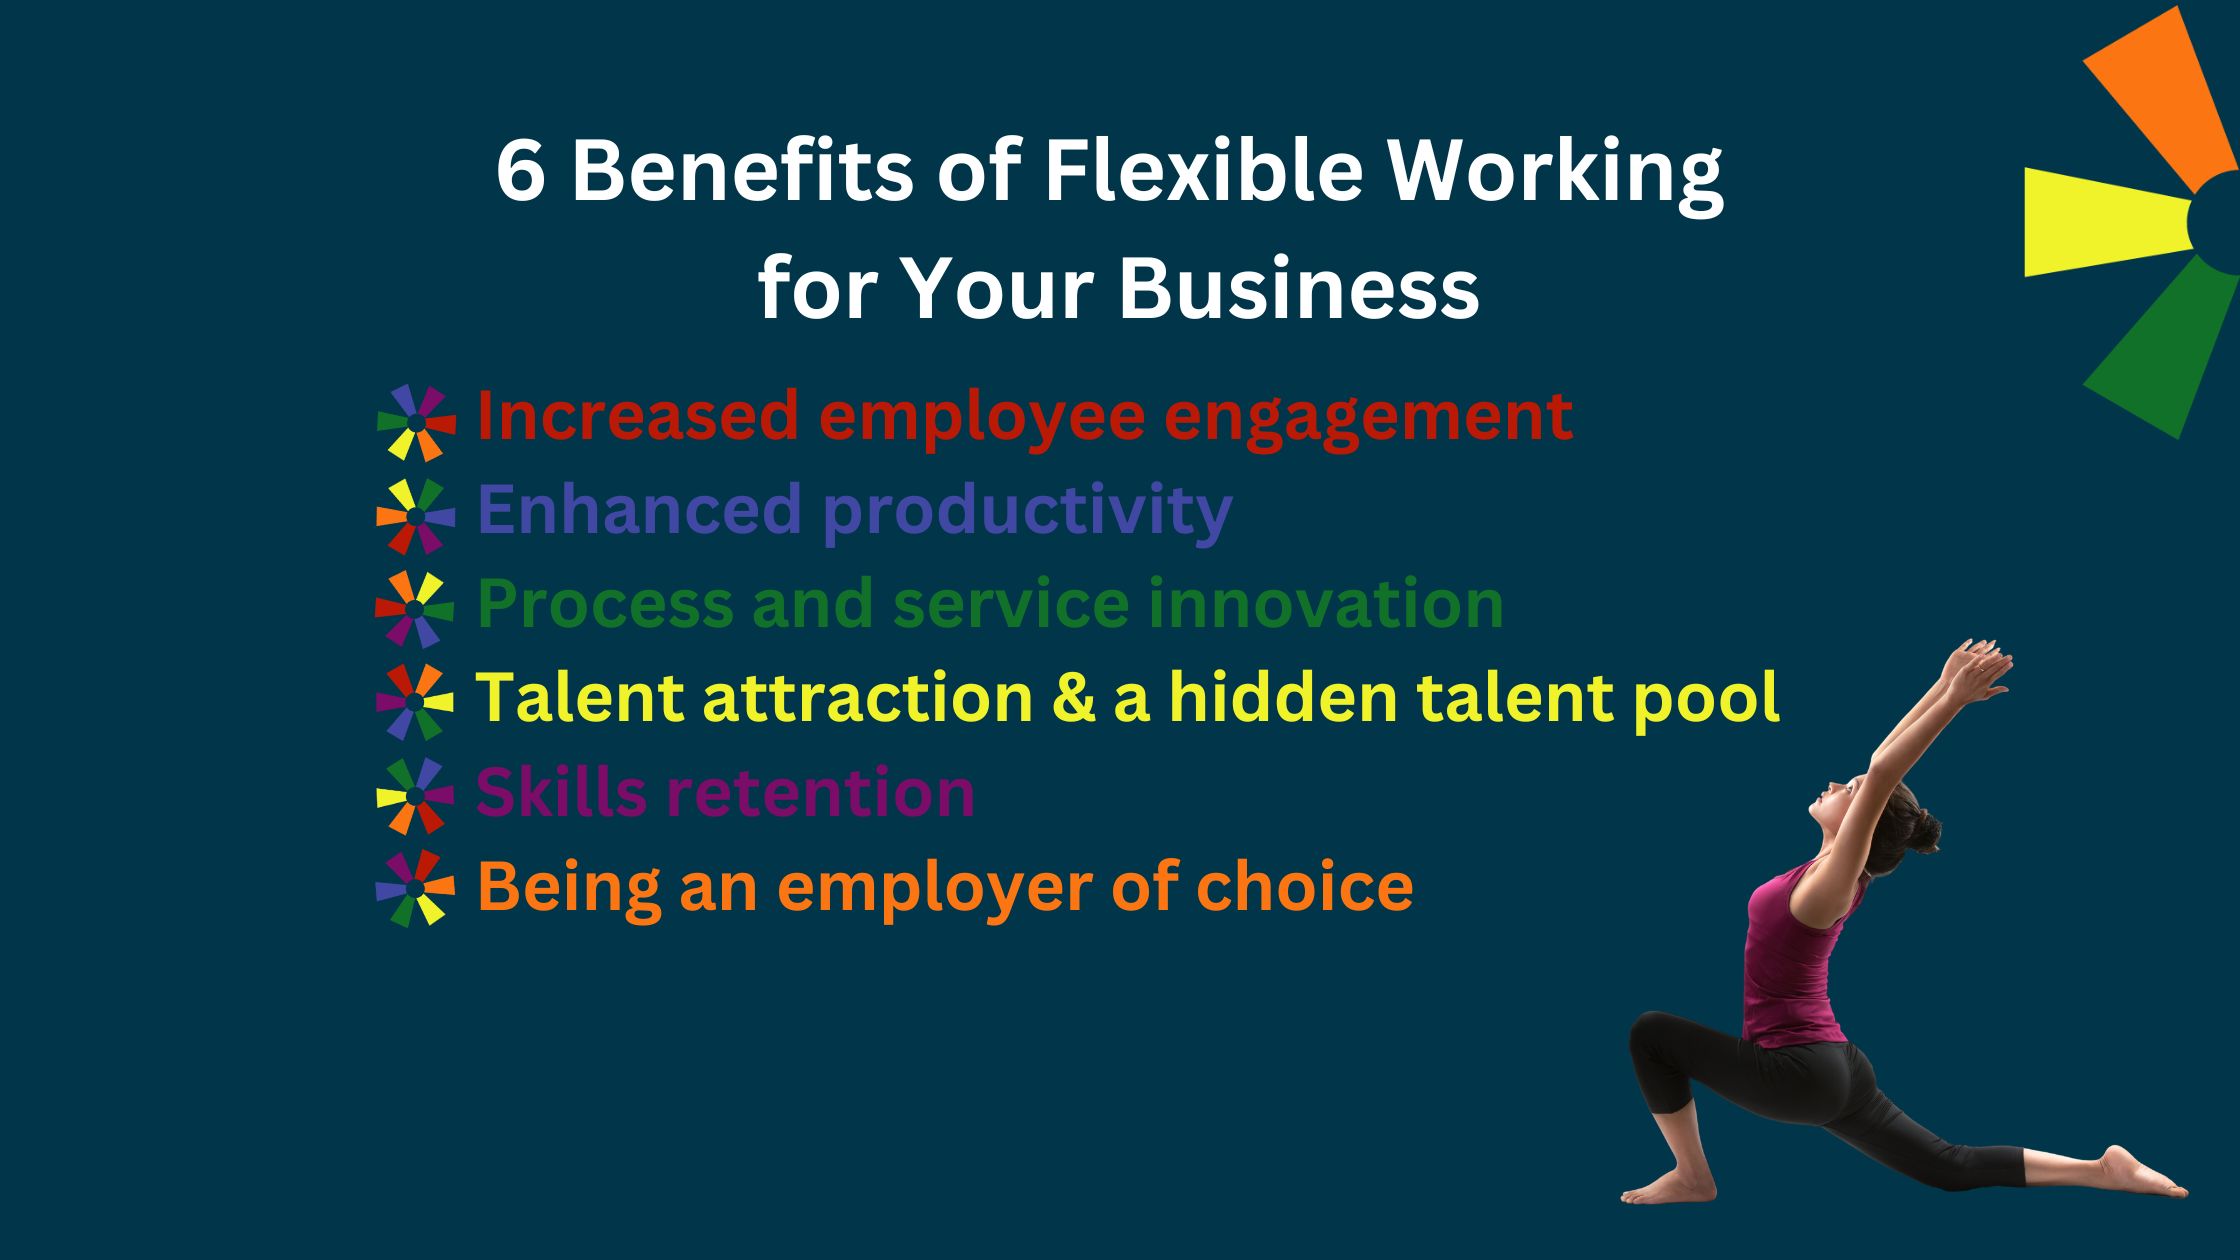 Dazzle Business support graphic summarising 6 benefits of flexible working for your business